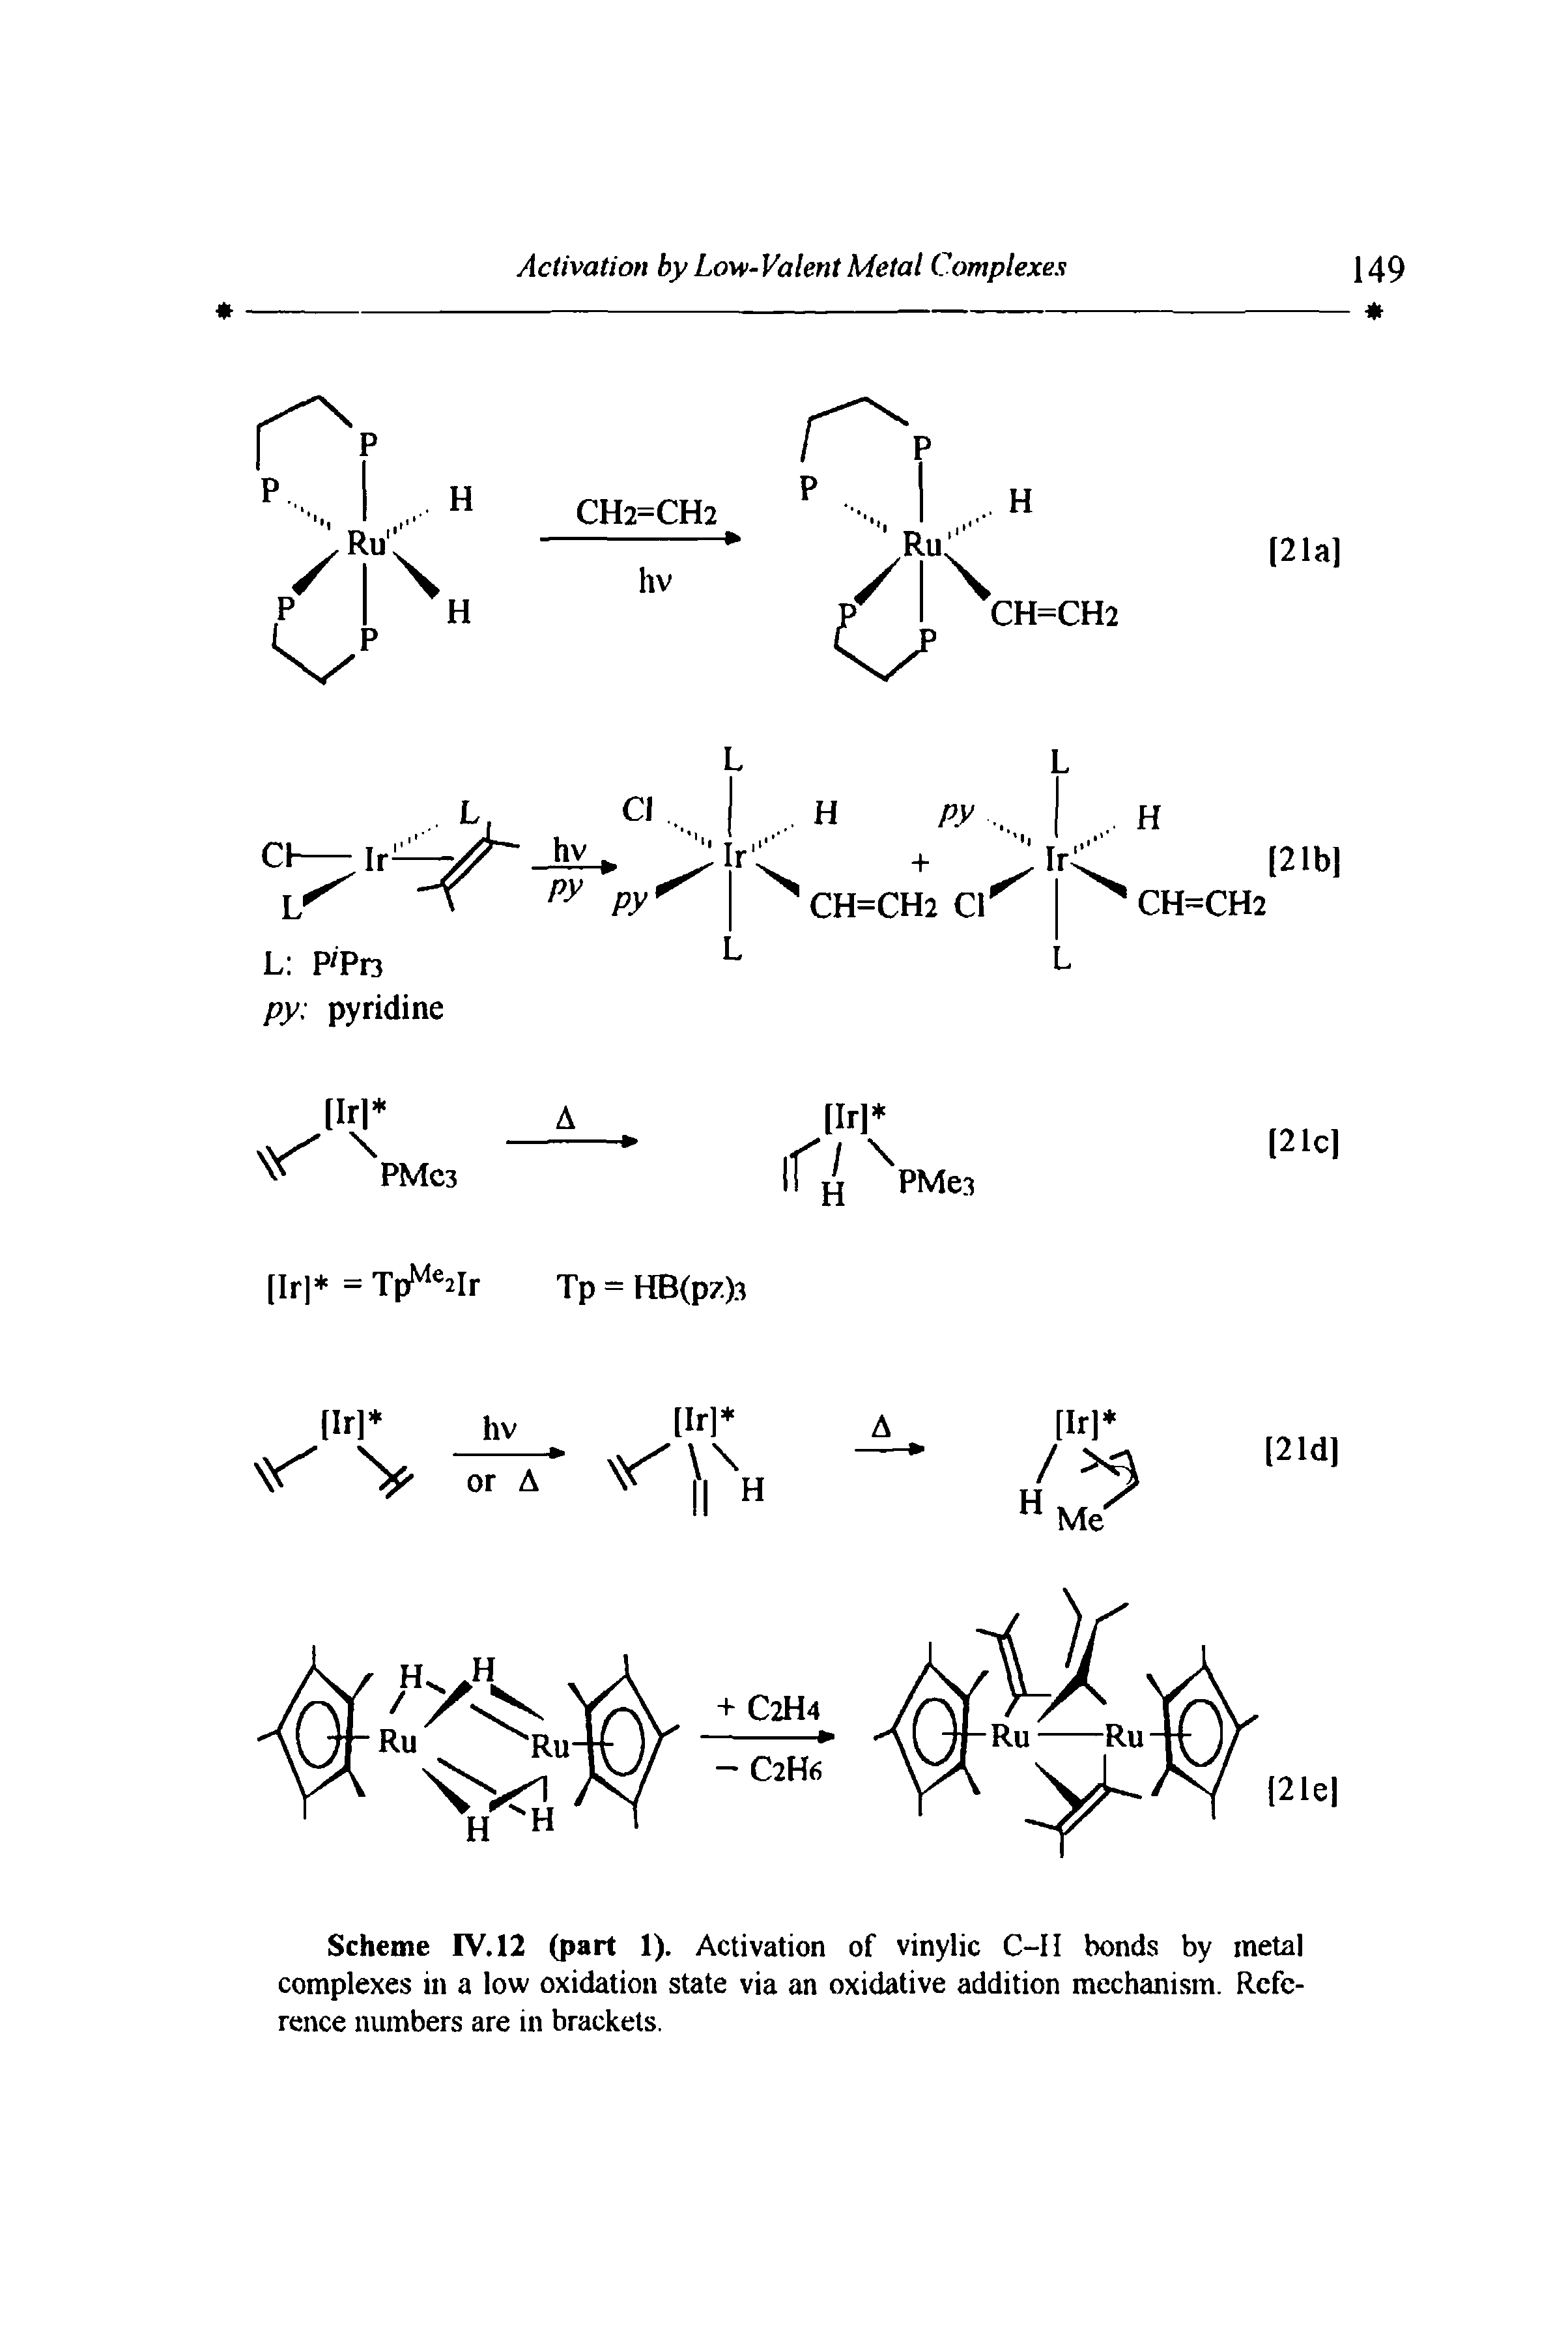 Scheme IV. 12 (part 1). Activation of vinylic C-H bonds by metal complexes in a low oxidation state via an oxidative addition mechanism. Reference numbers are in brackets.